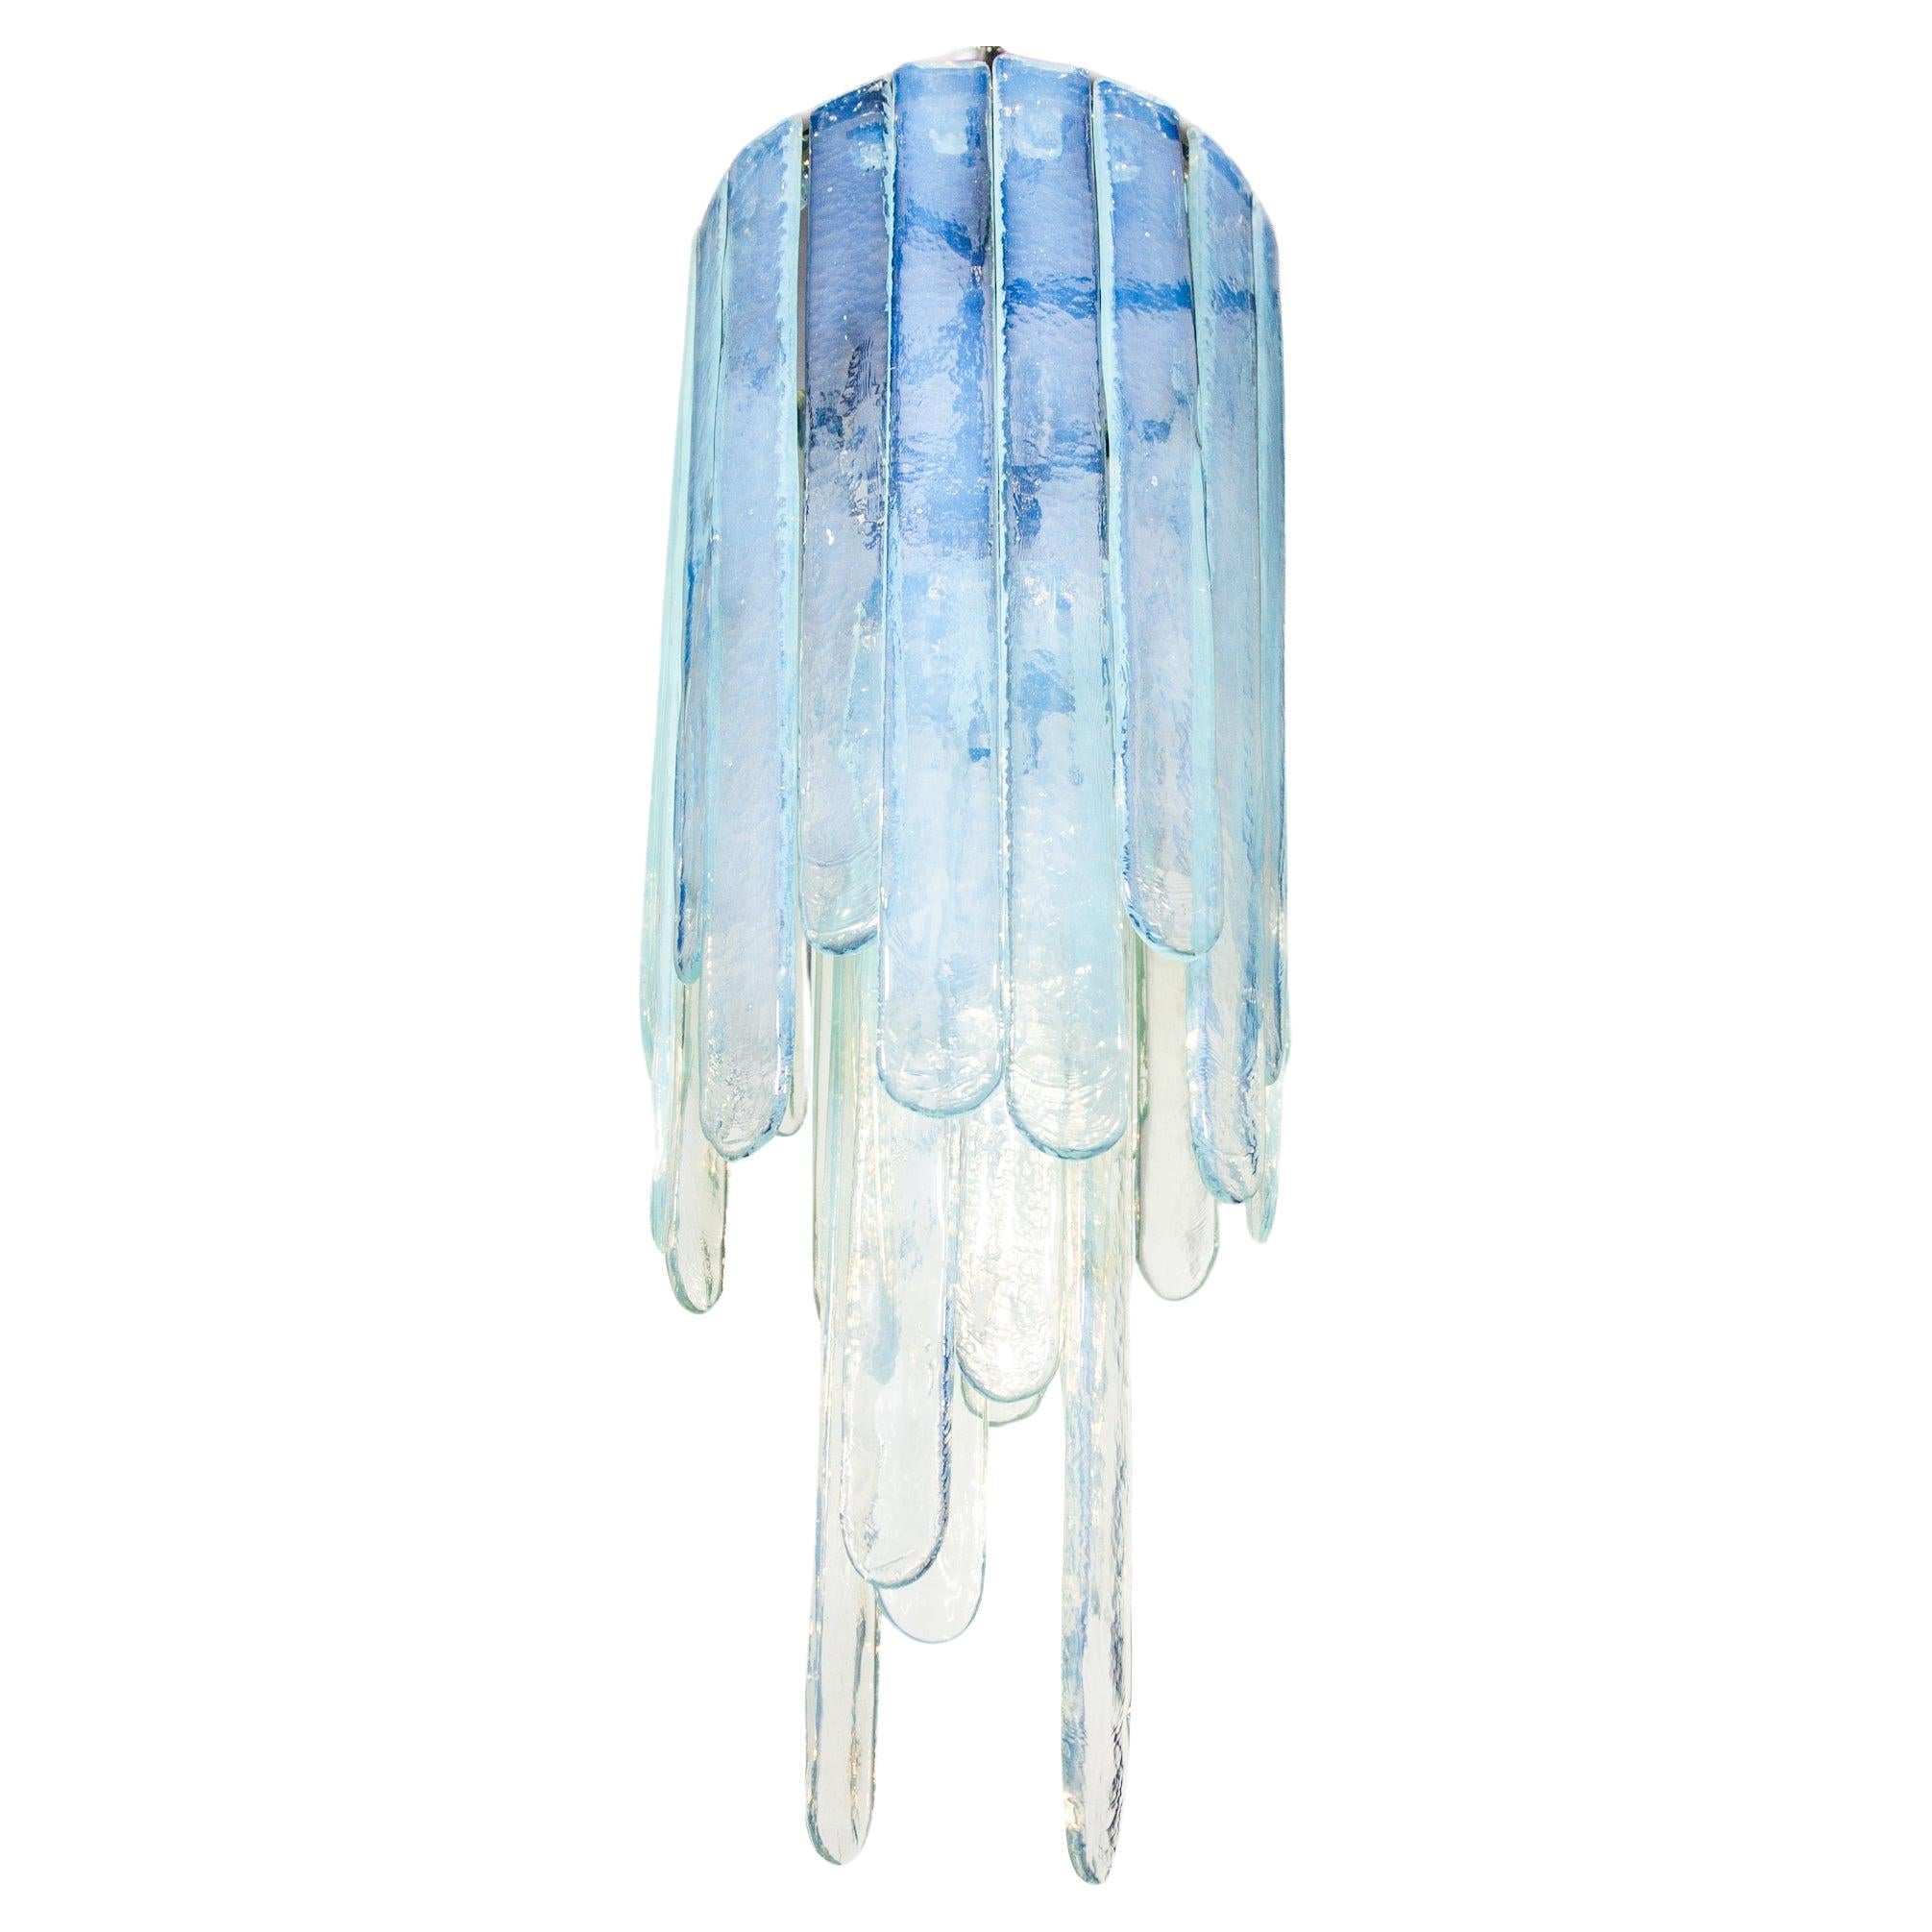 Mid-Century Modern Opalescent Glass Chandelier designed by Carlo Nason for Mazzega, 1960s For Sale